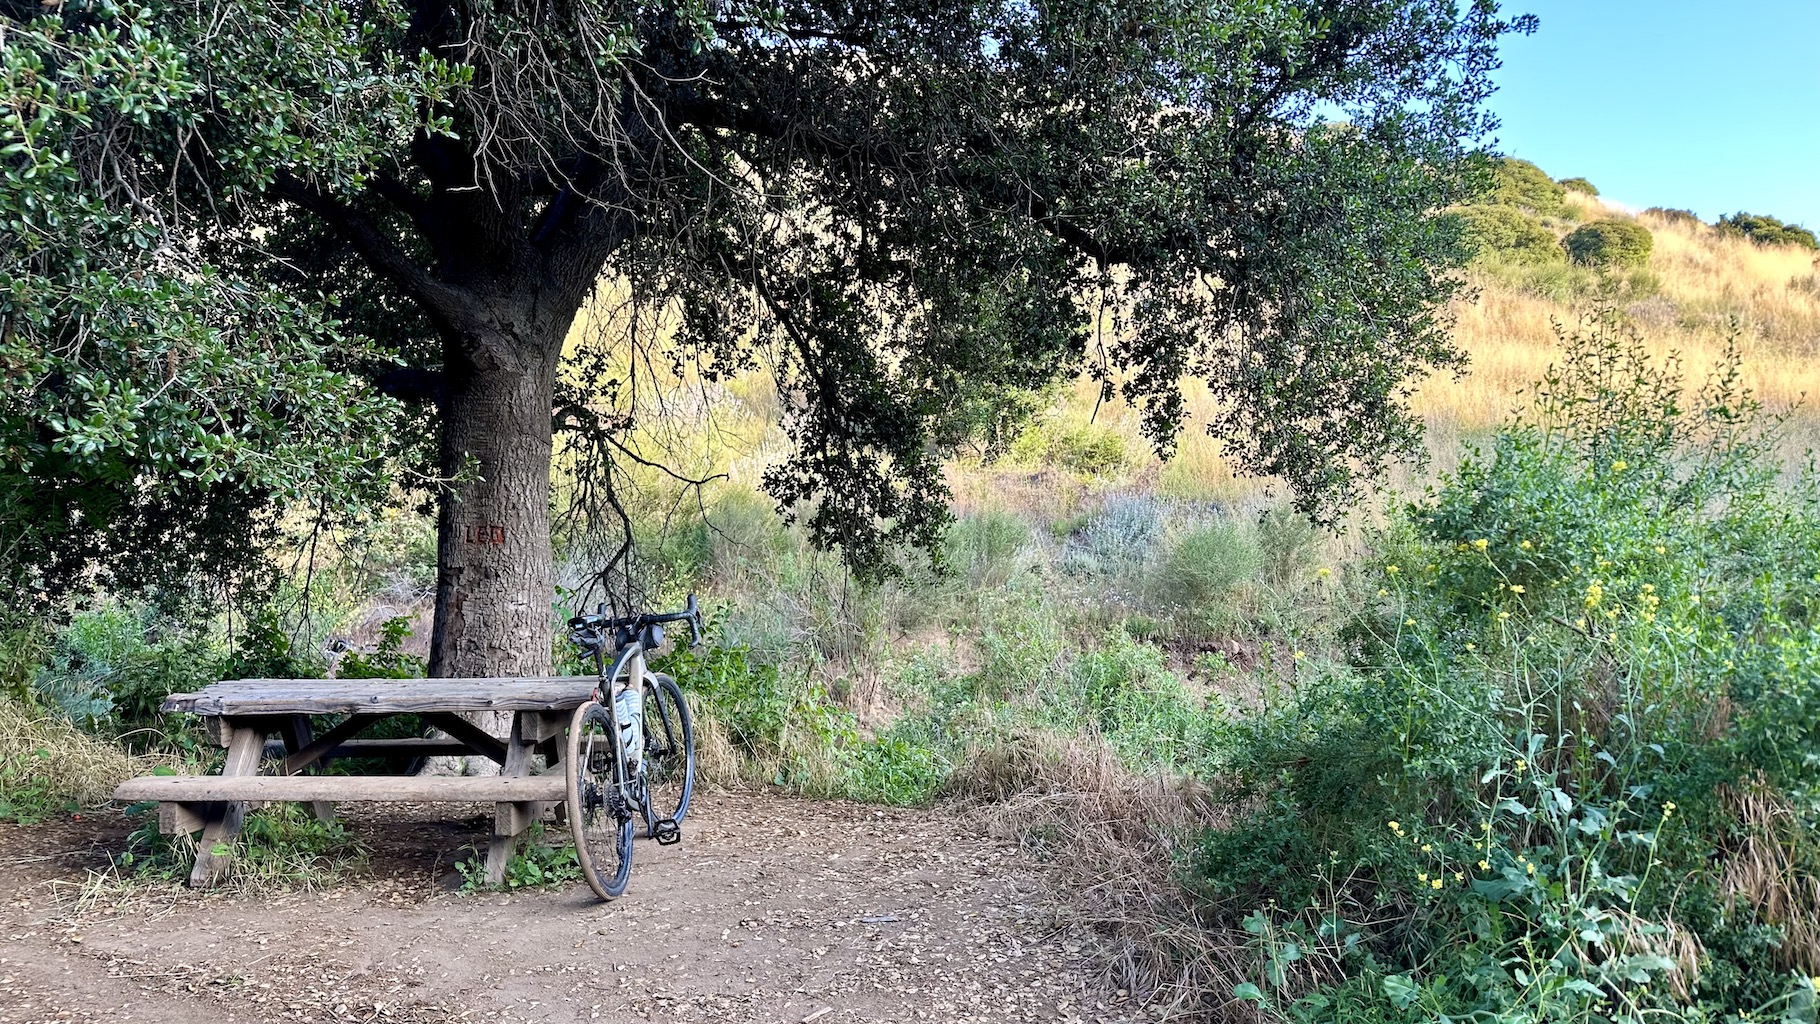 gravel bike leaning against a picnic table